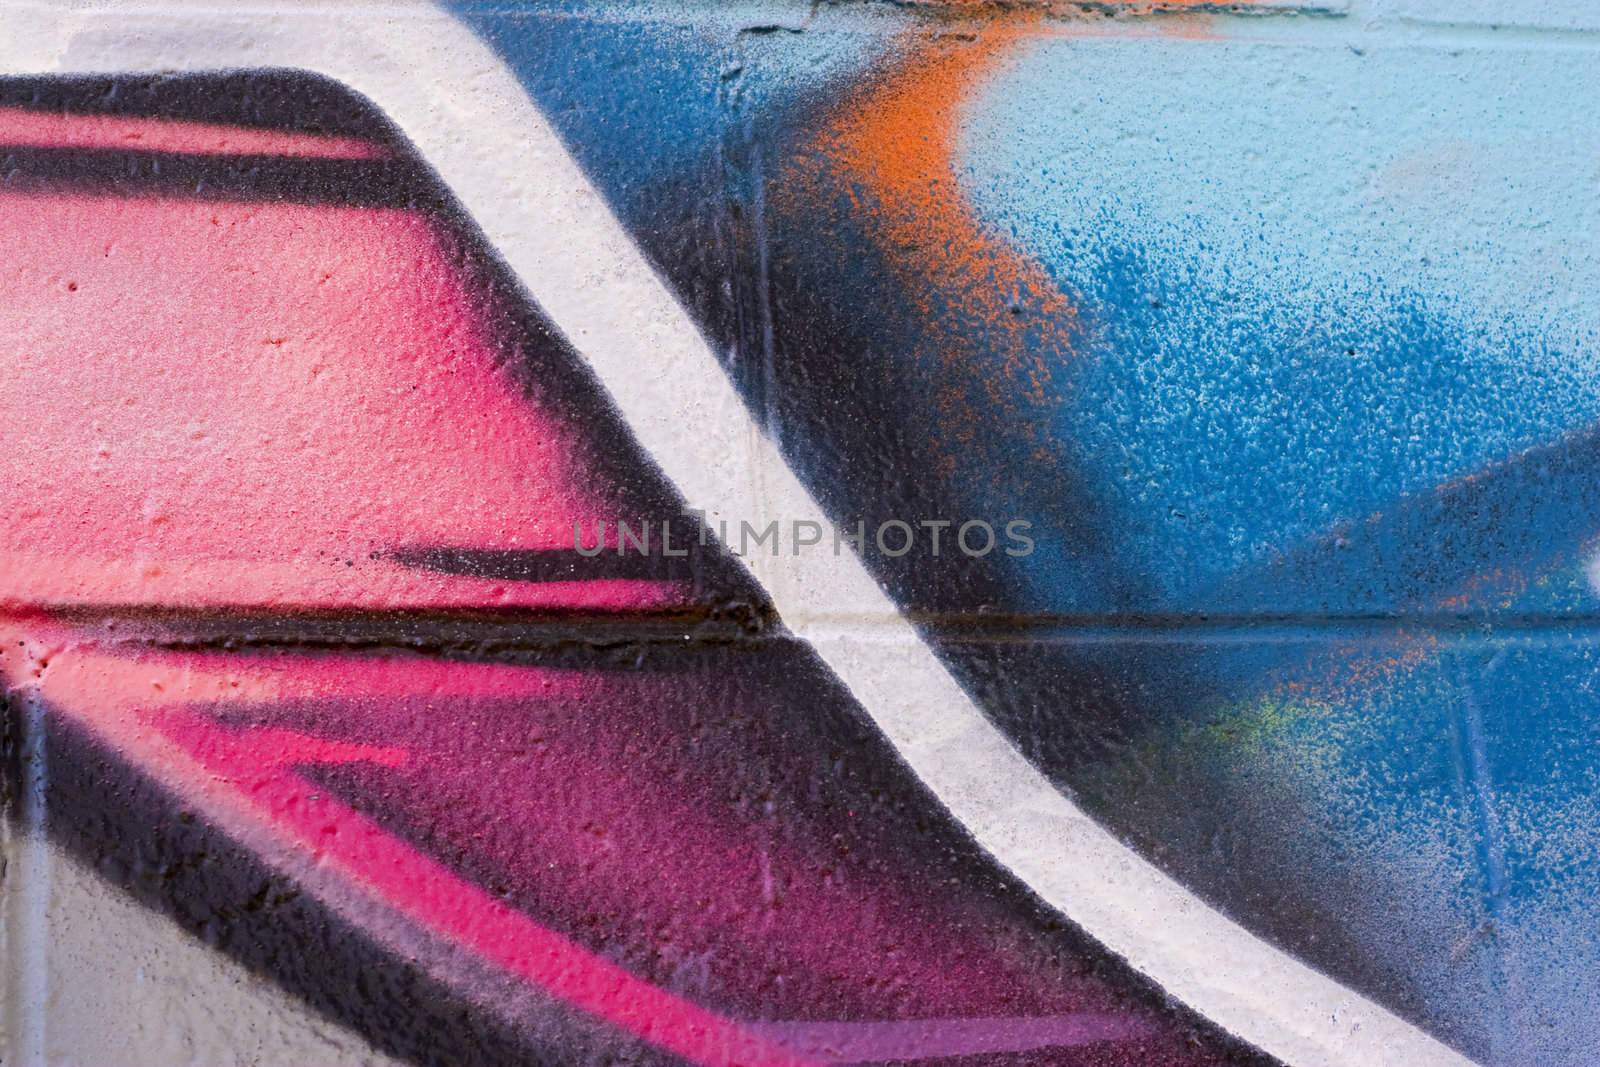 Graffiti texture - works great as a background or backdrop in any design.